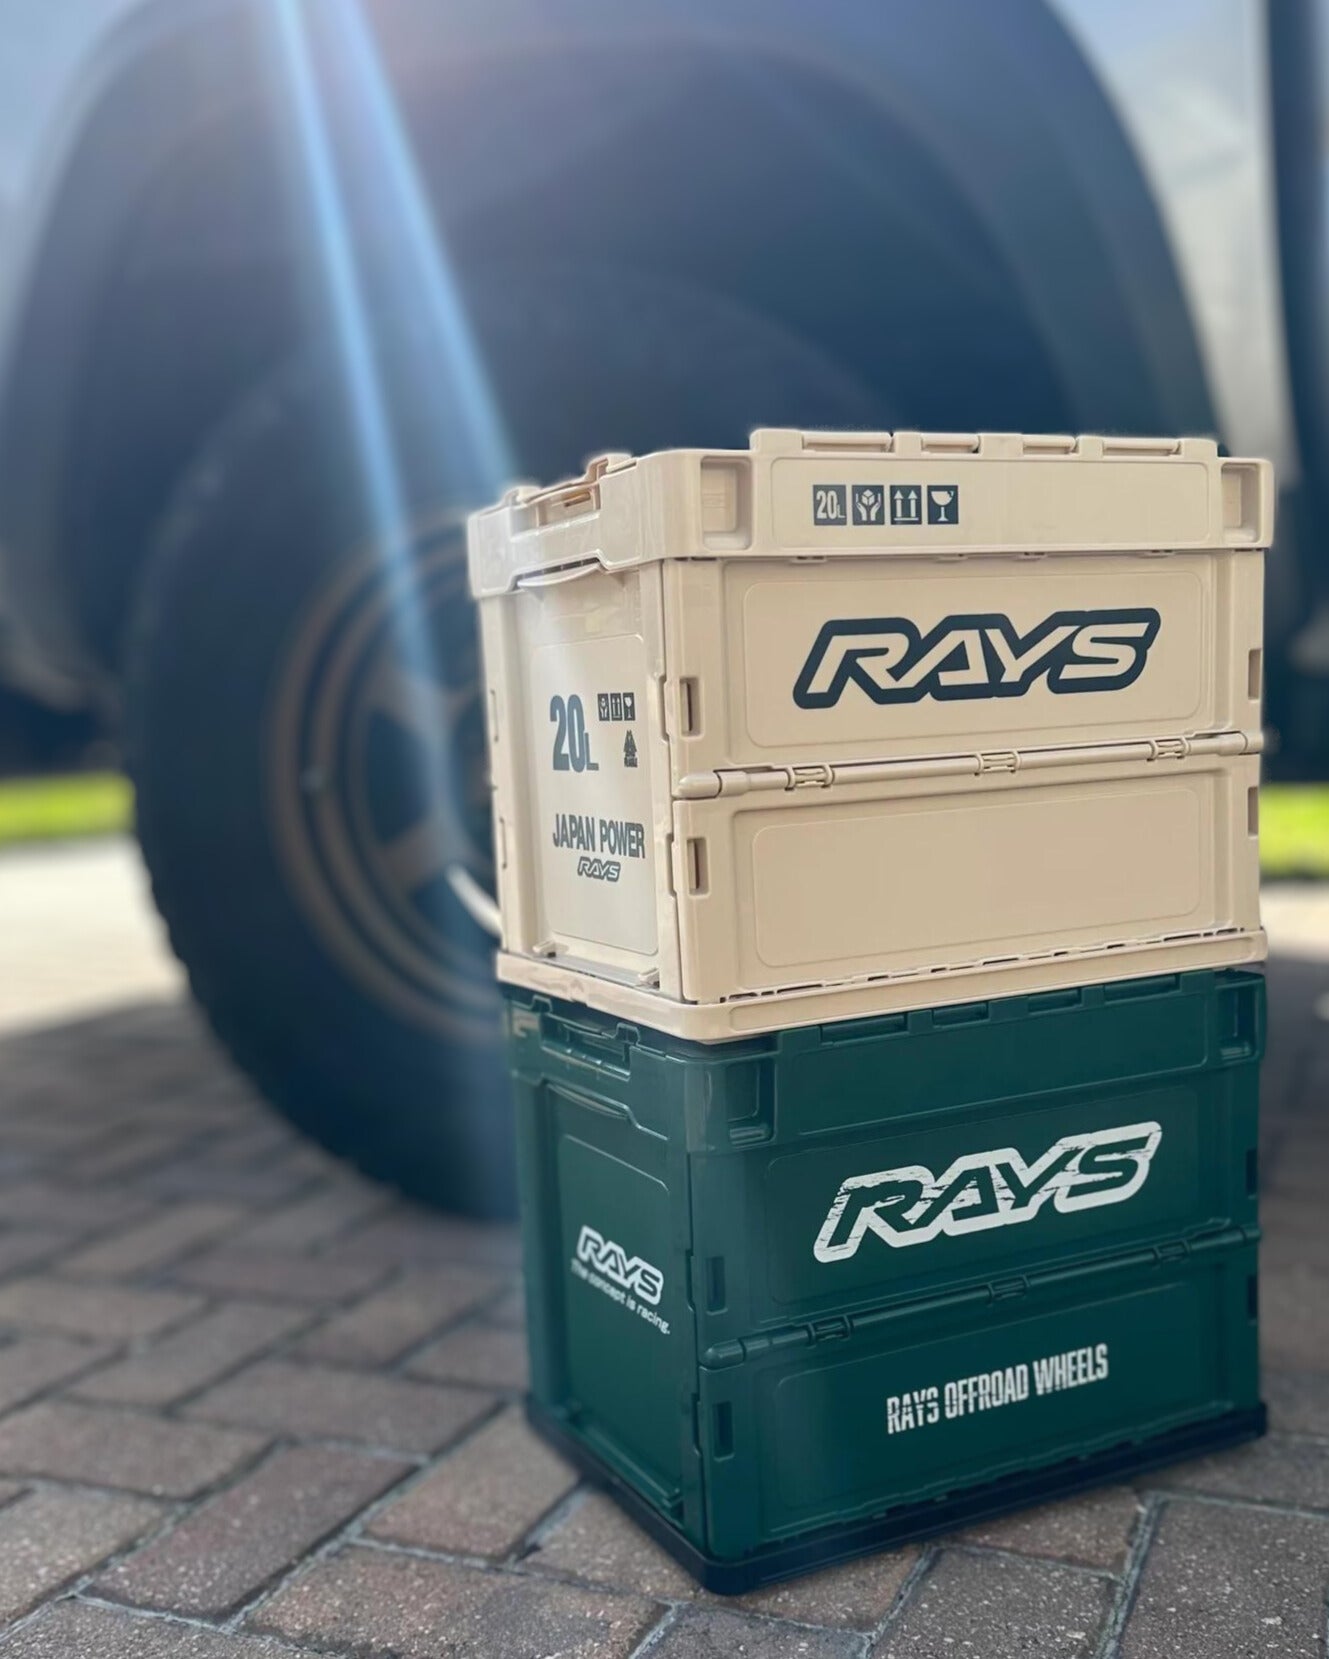 rays_container_box.jpg